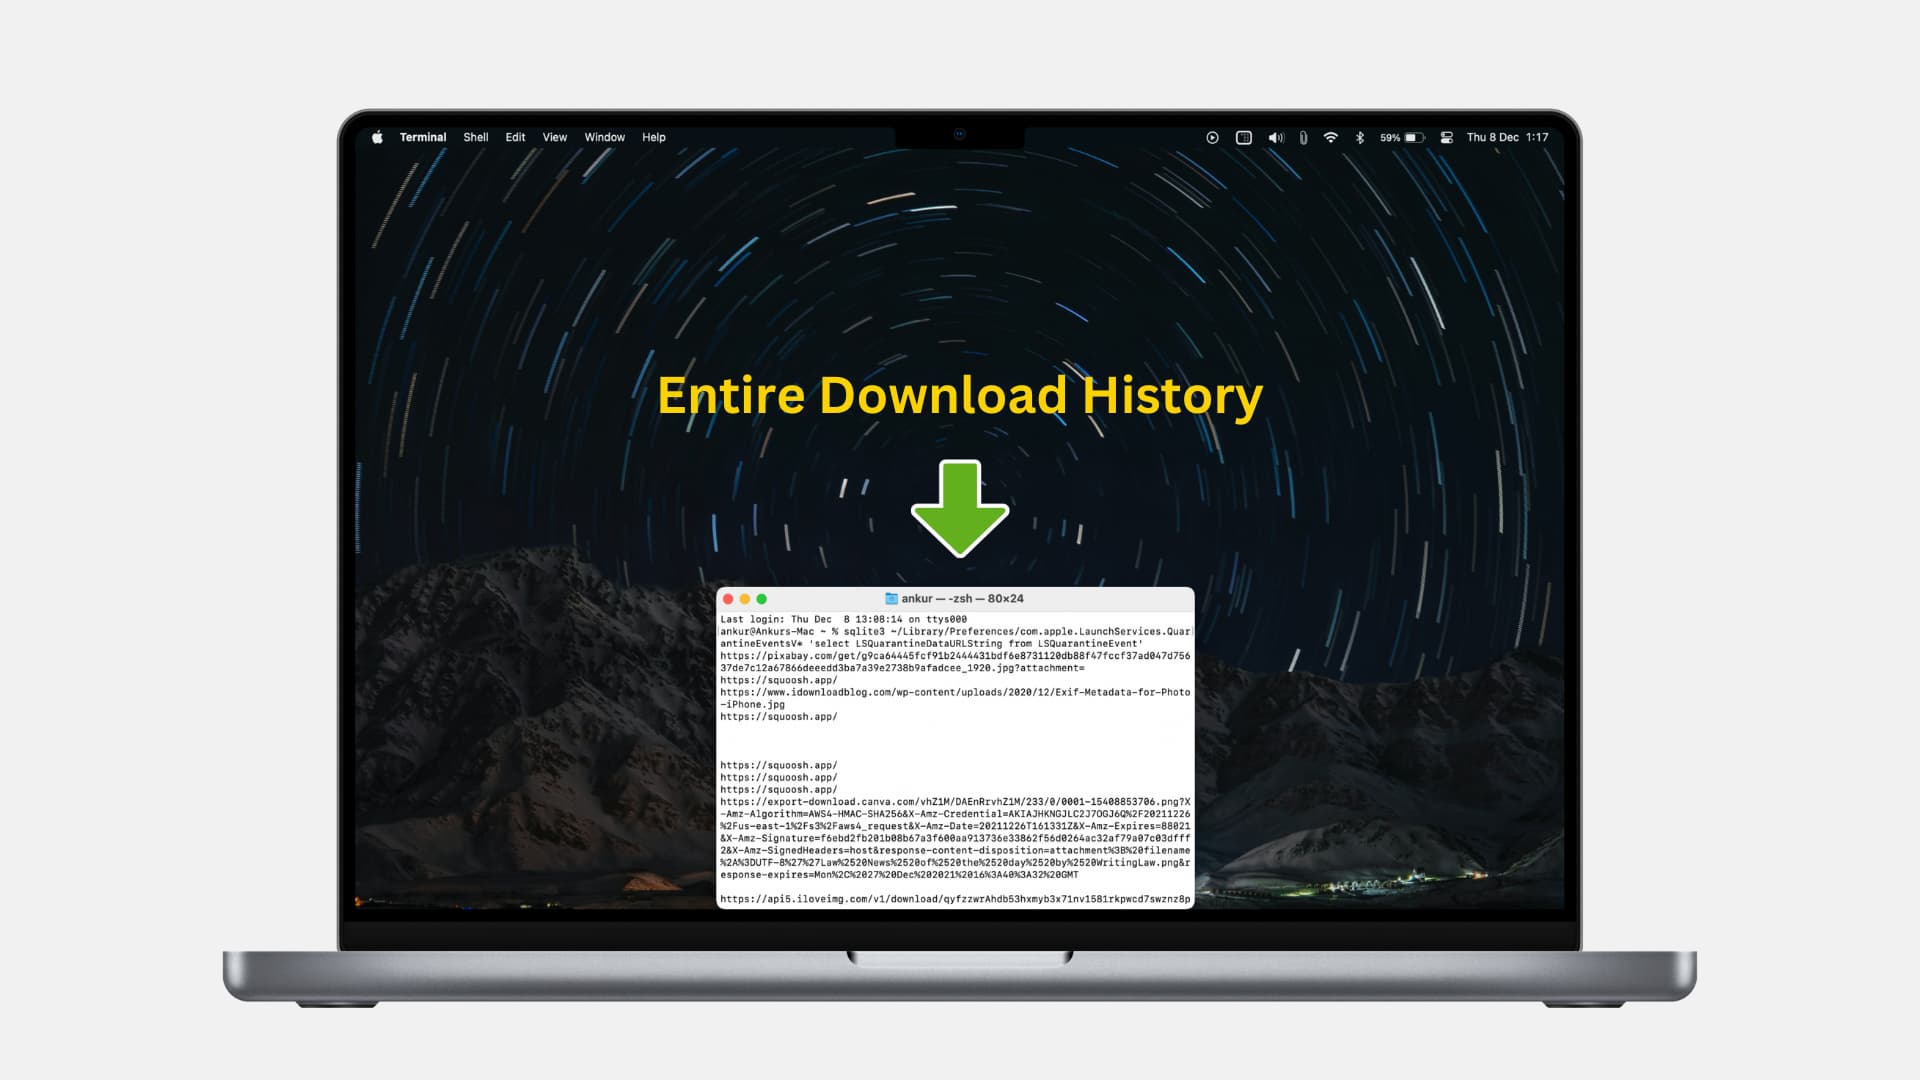 See the entire download history of your Mac